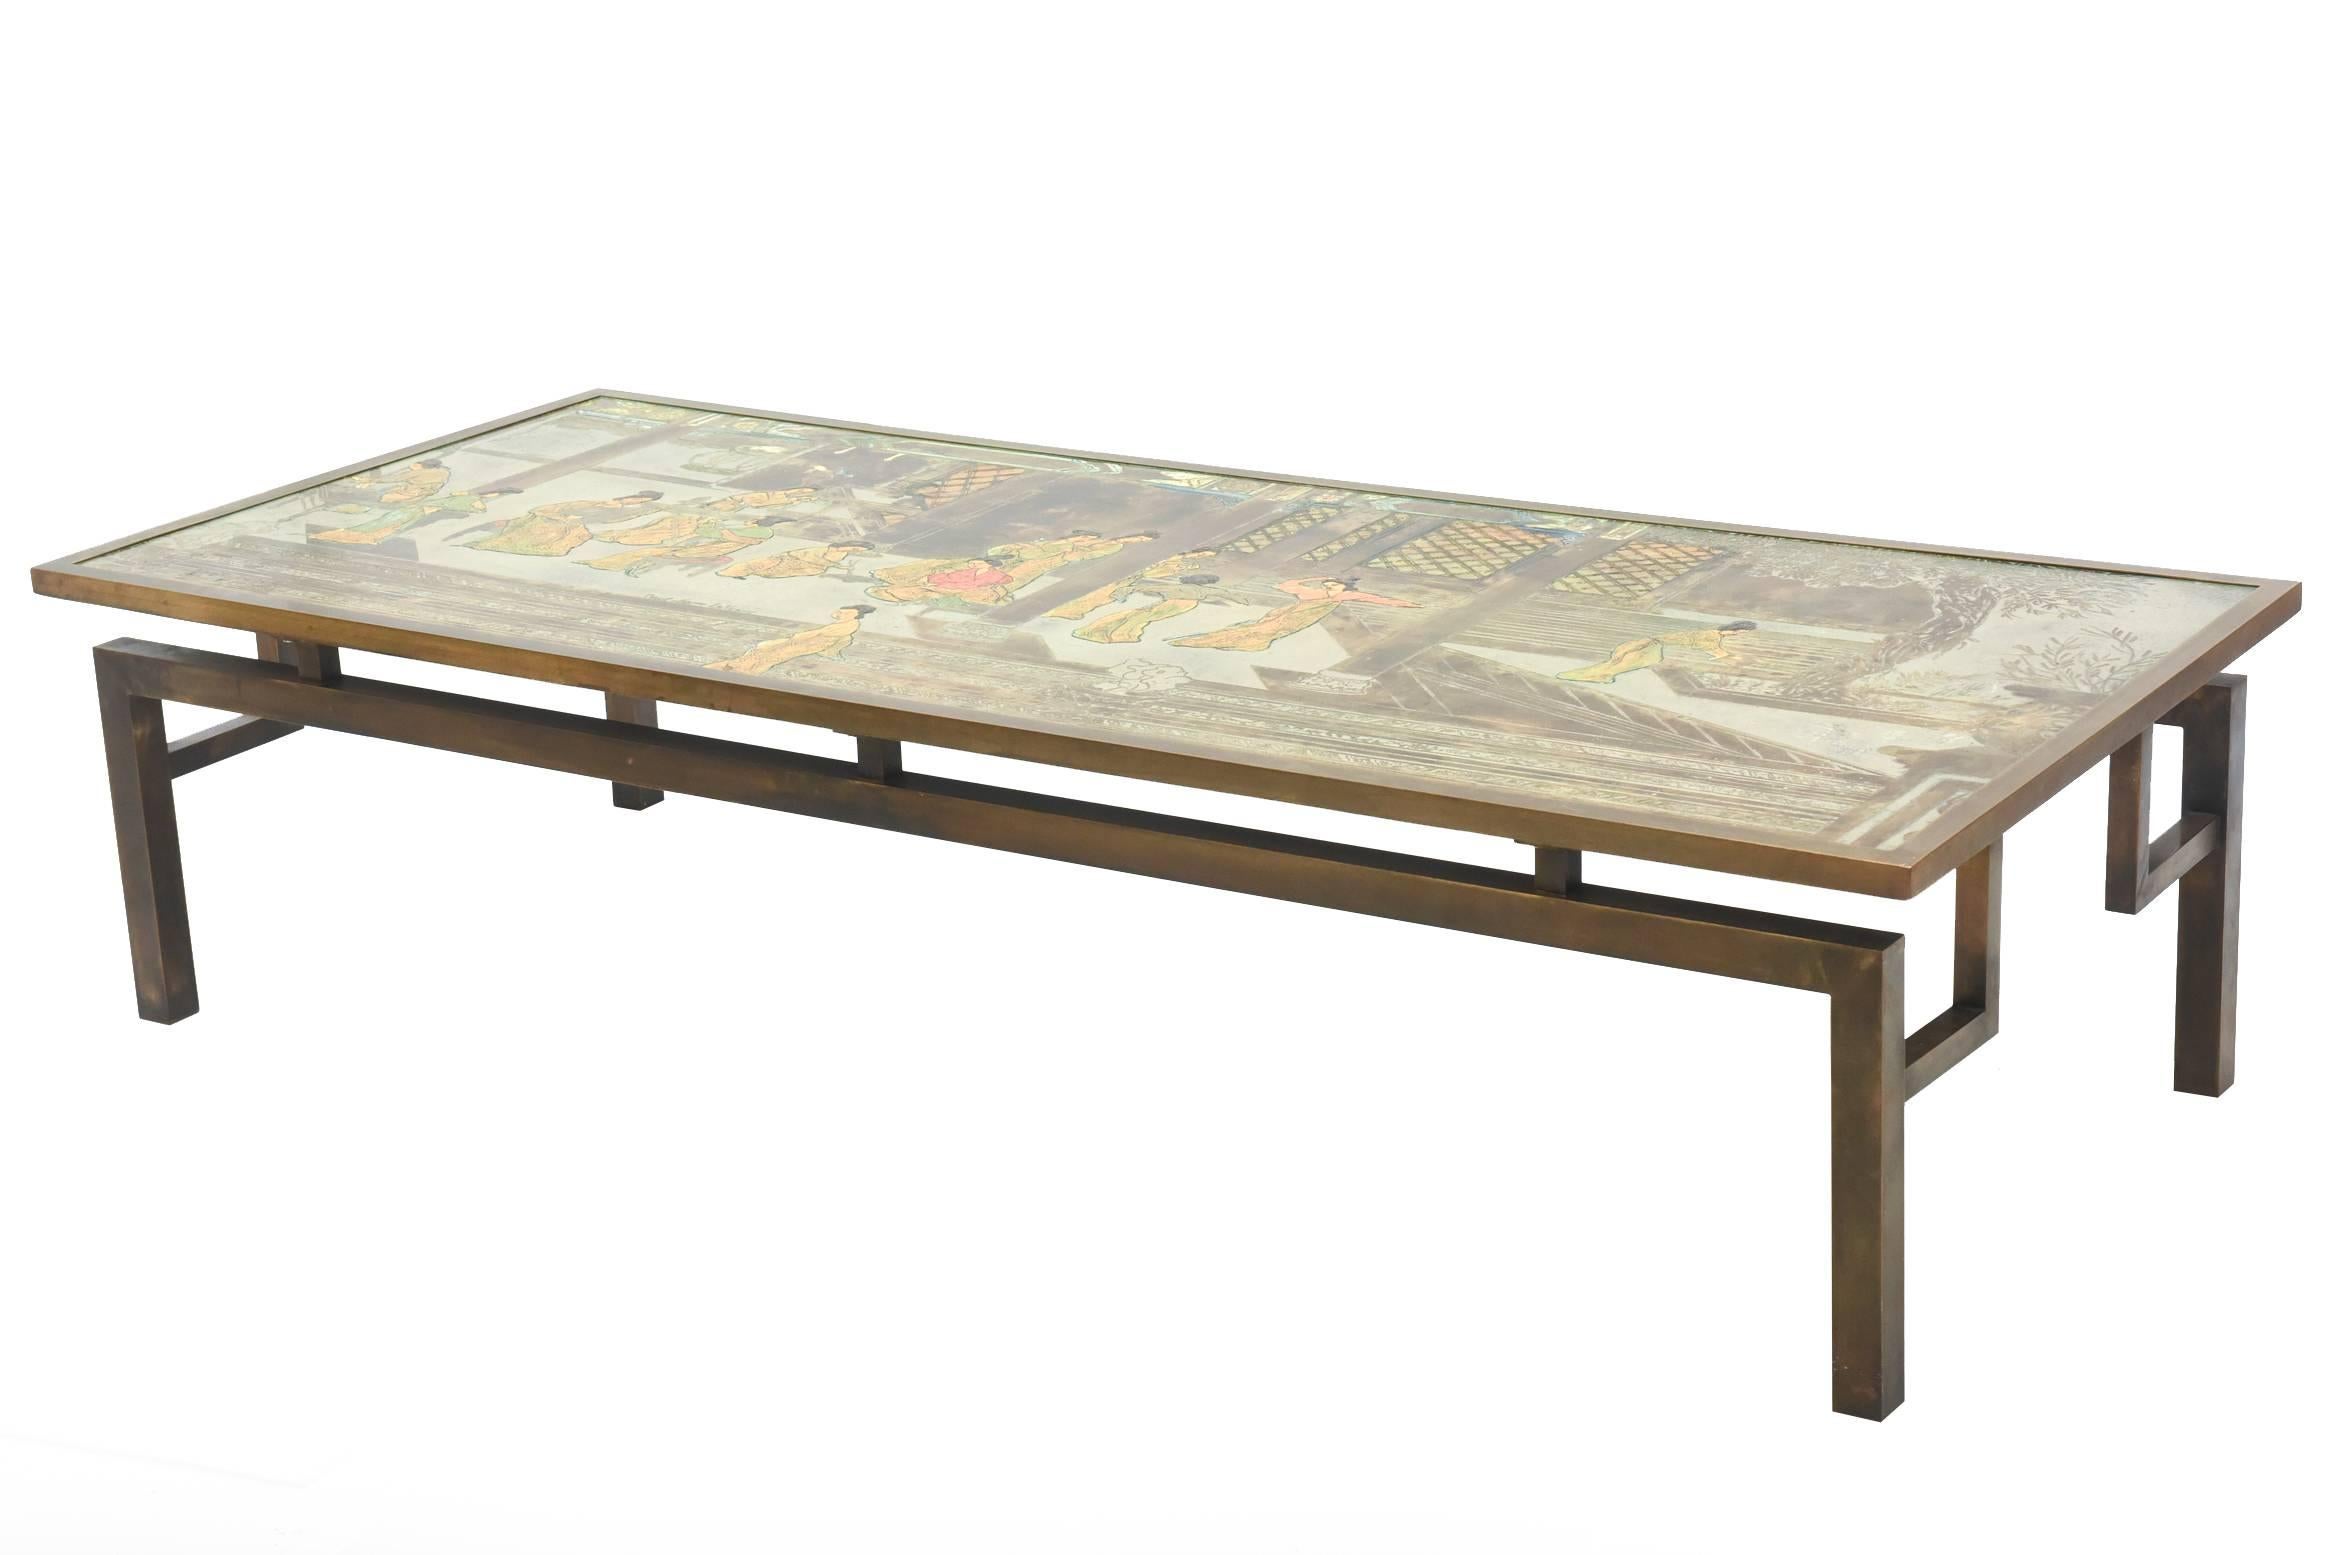 the top overall in oriental motif with painted and patinated sections, on a base with pierced supports on square legs.